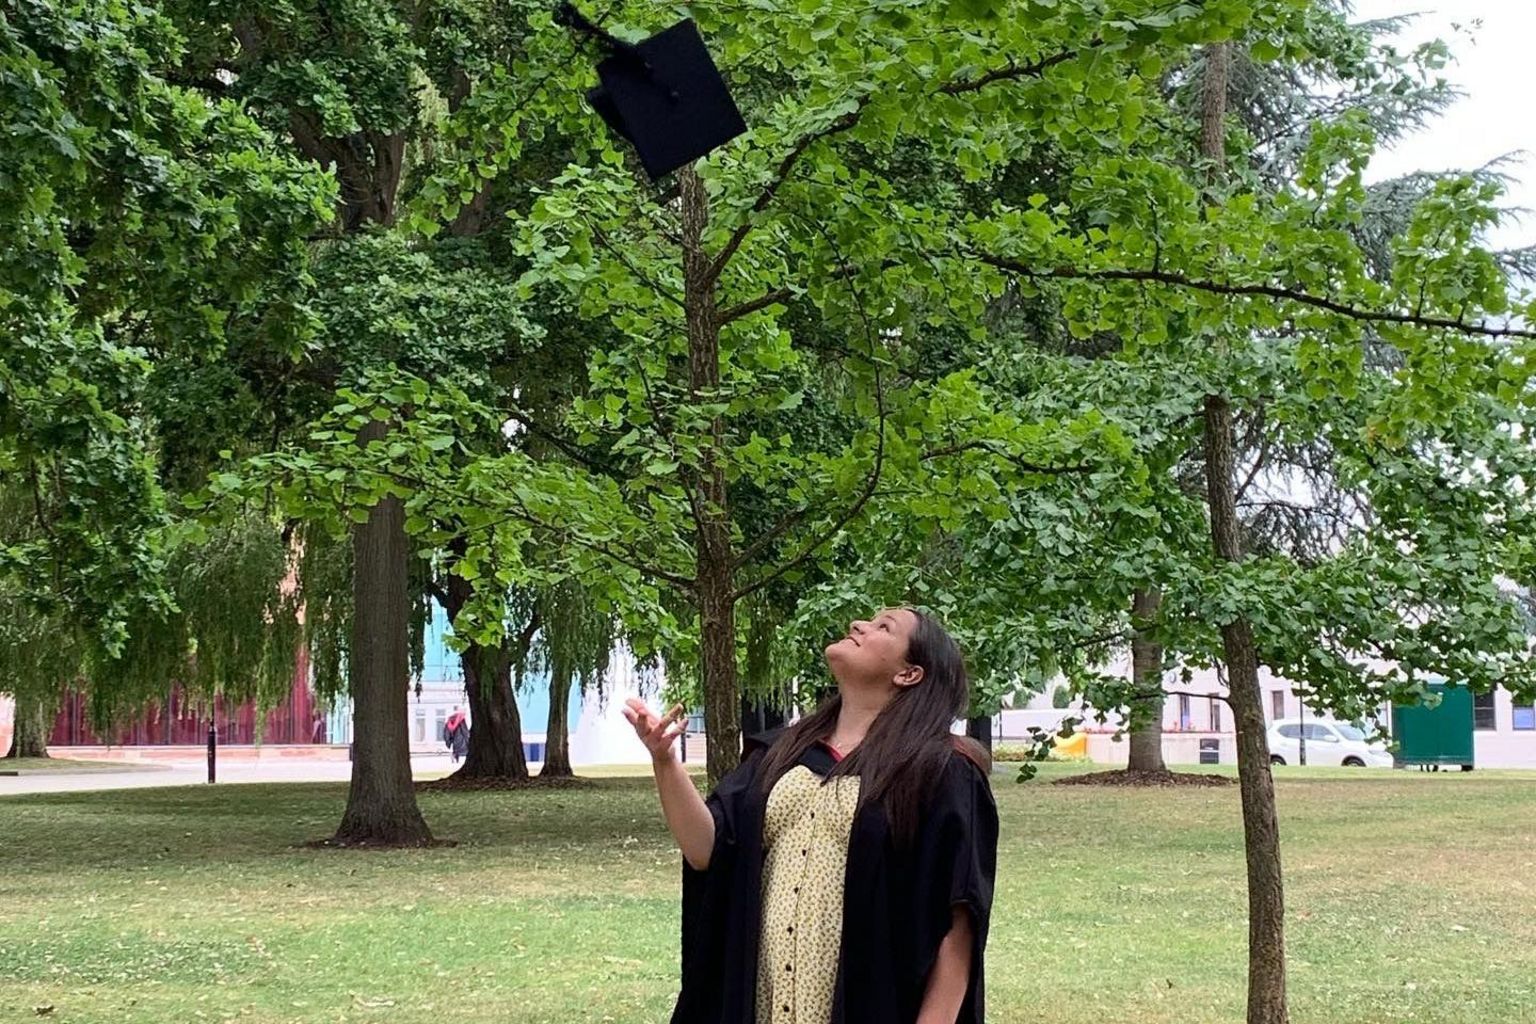 Abbie Tutt in clothing worn for graduation, throwing her hat in the air in front of a park with a tree directly behind her.